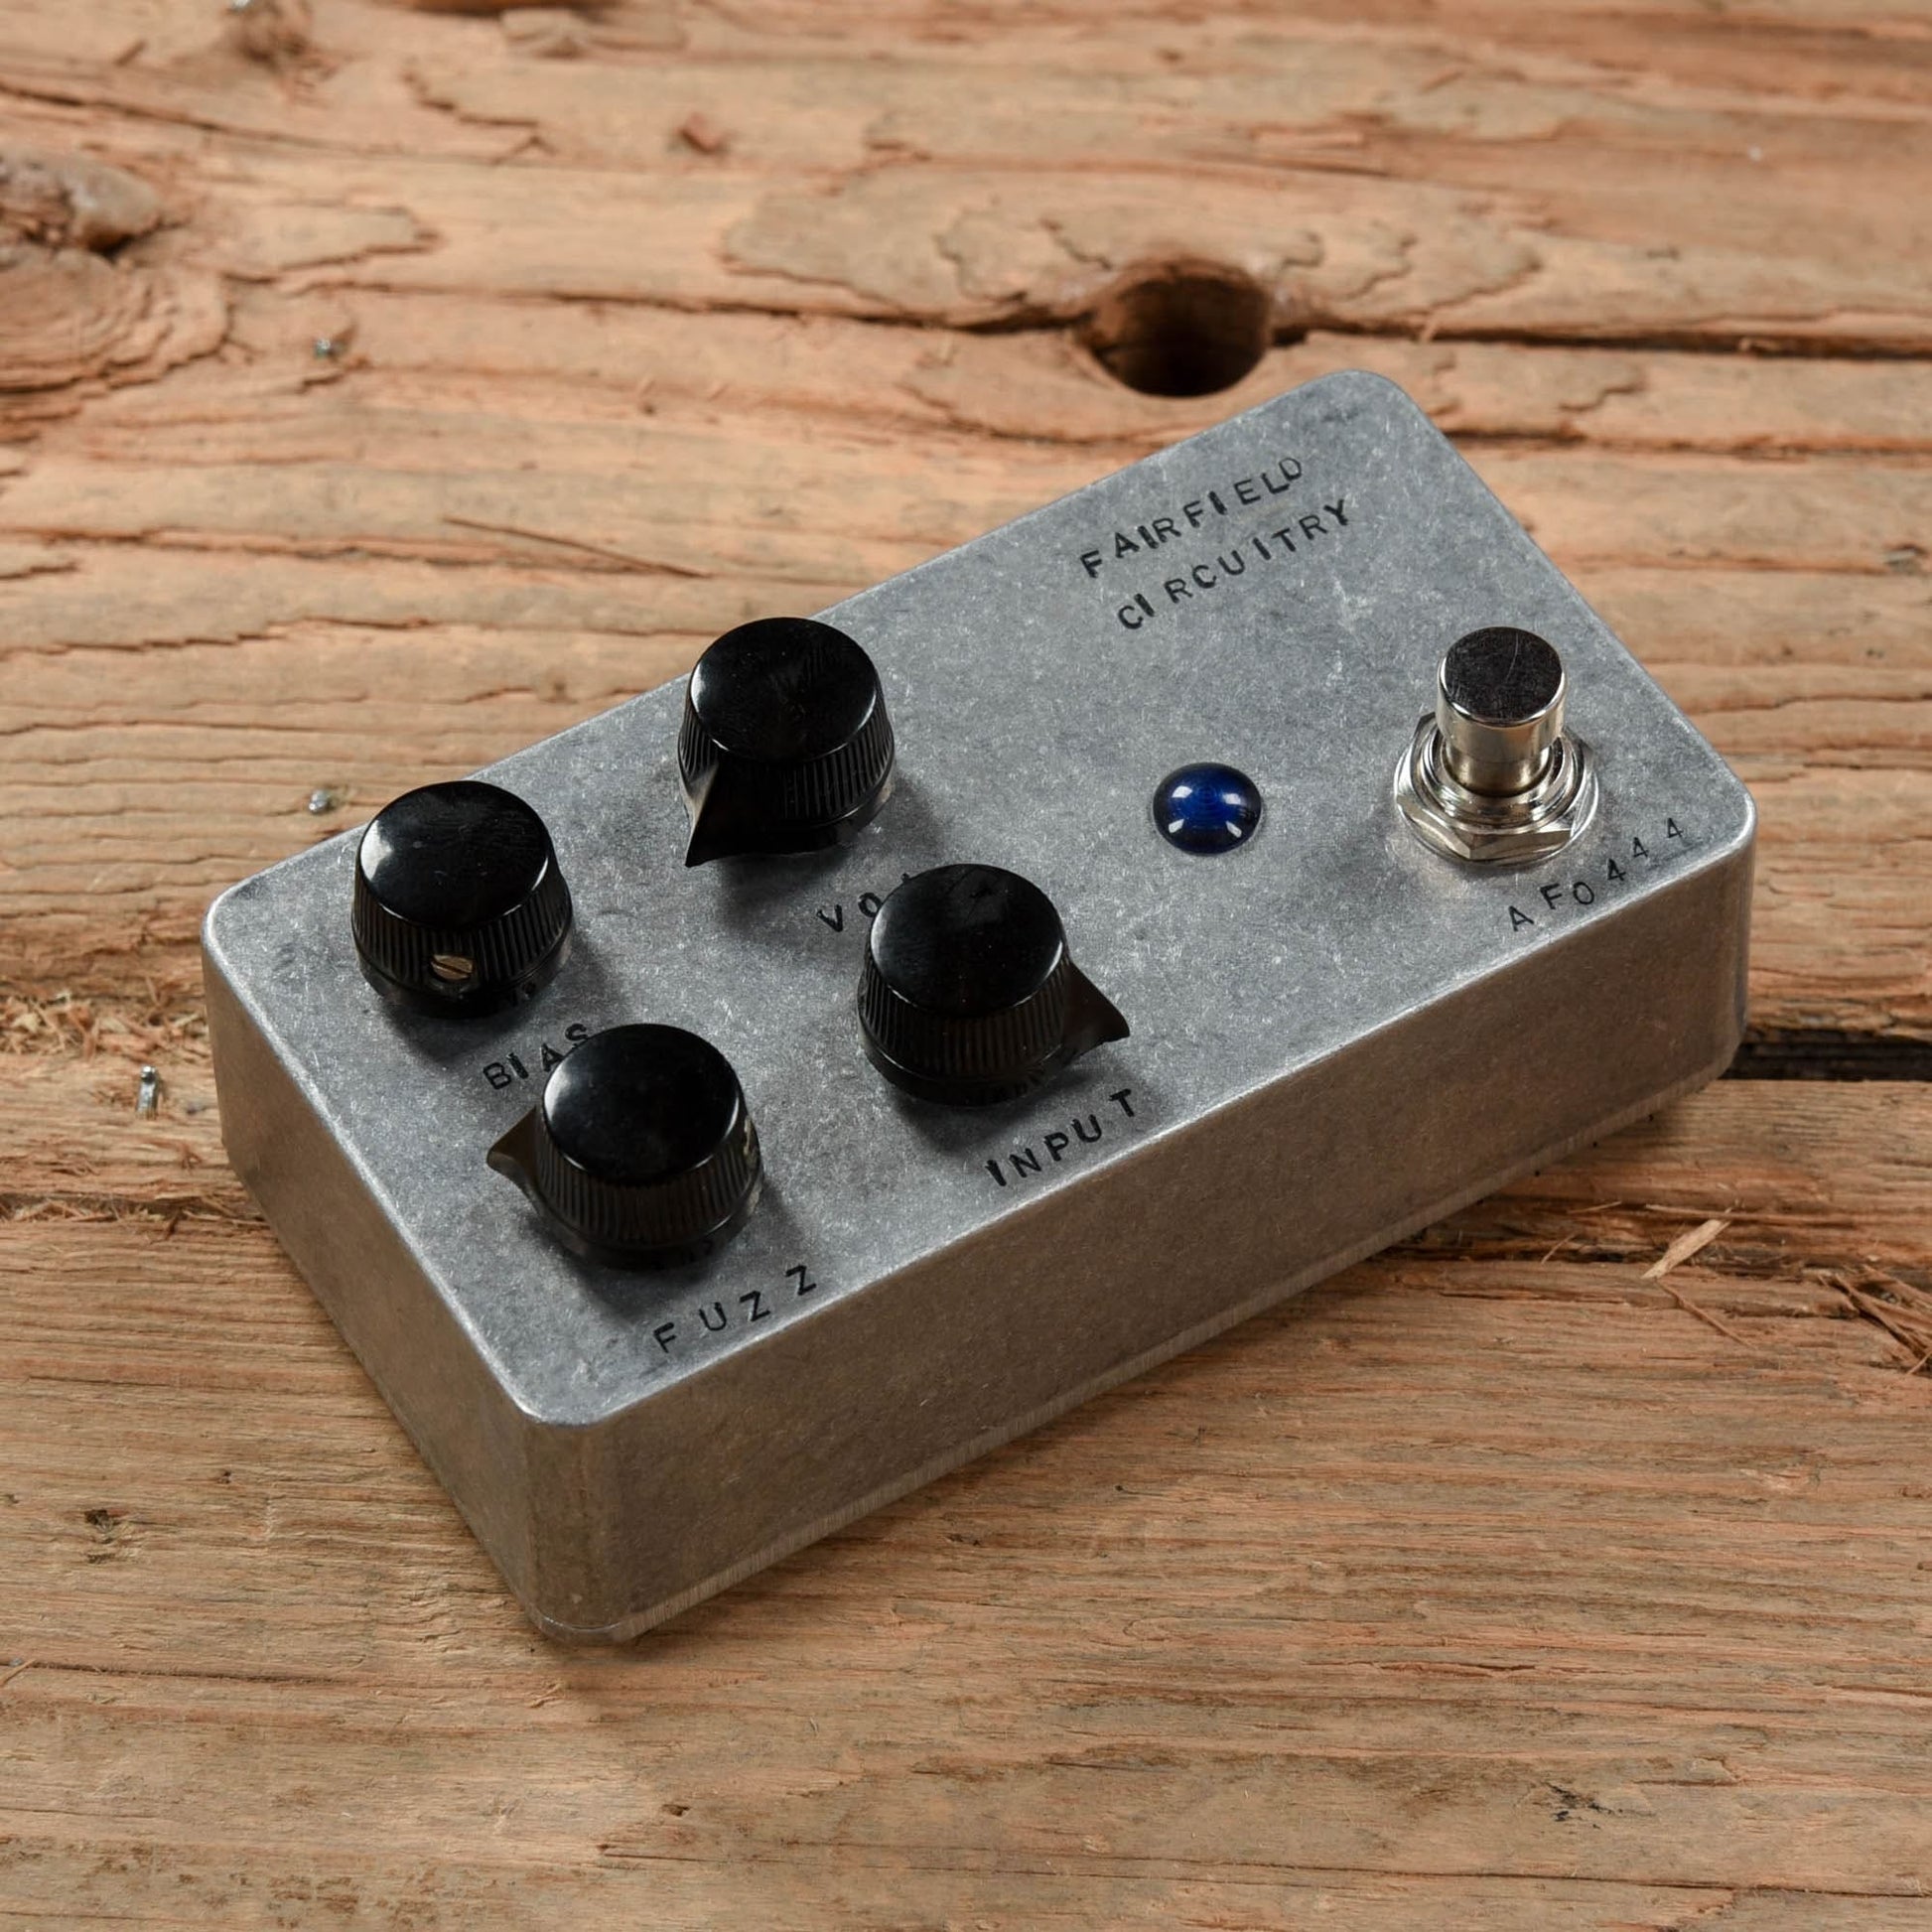 Fairfield Circuitry ~900 About Nine Hundred Fuzz Effects and Pedals / Fuzz